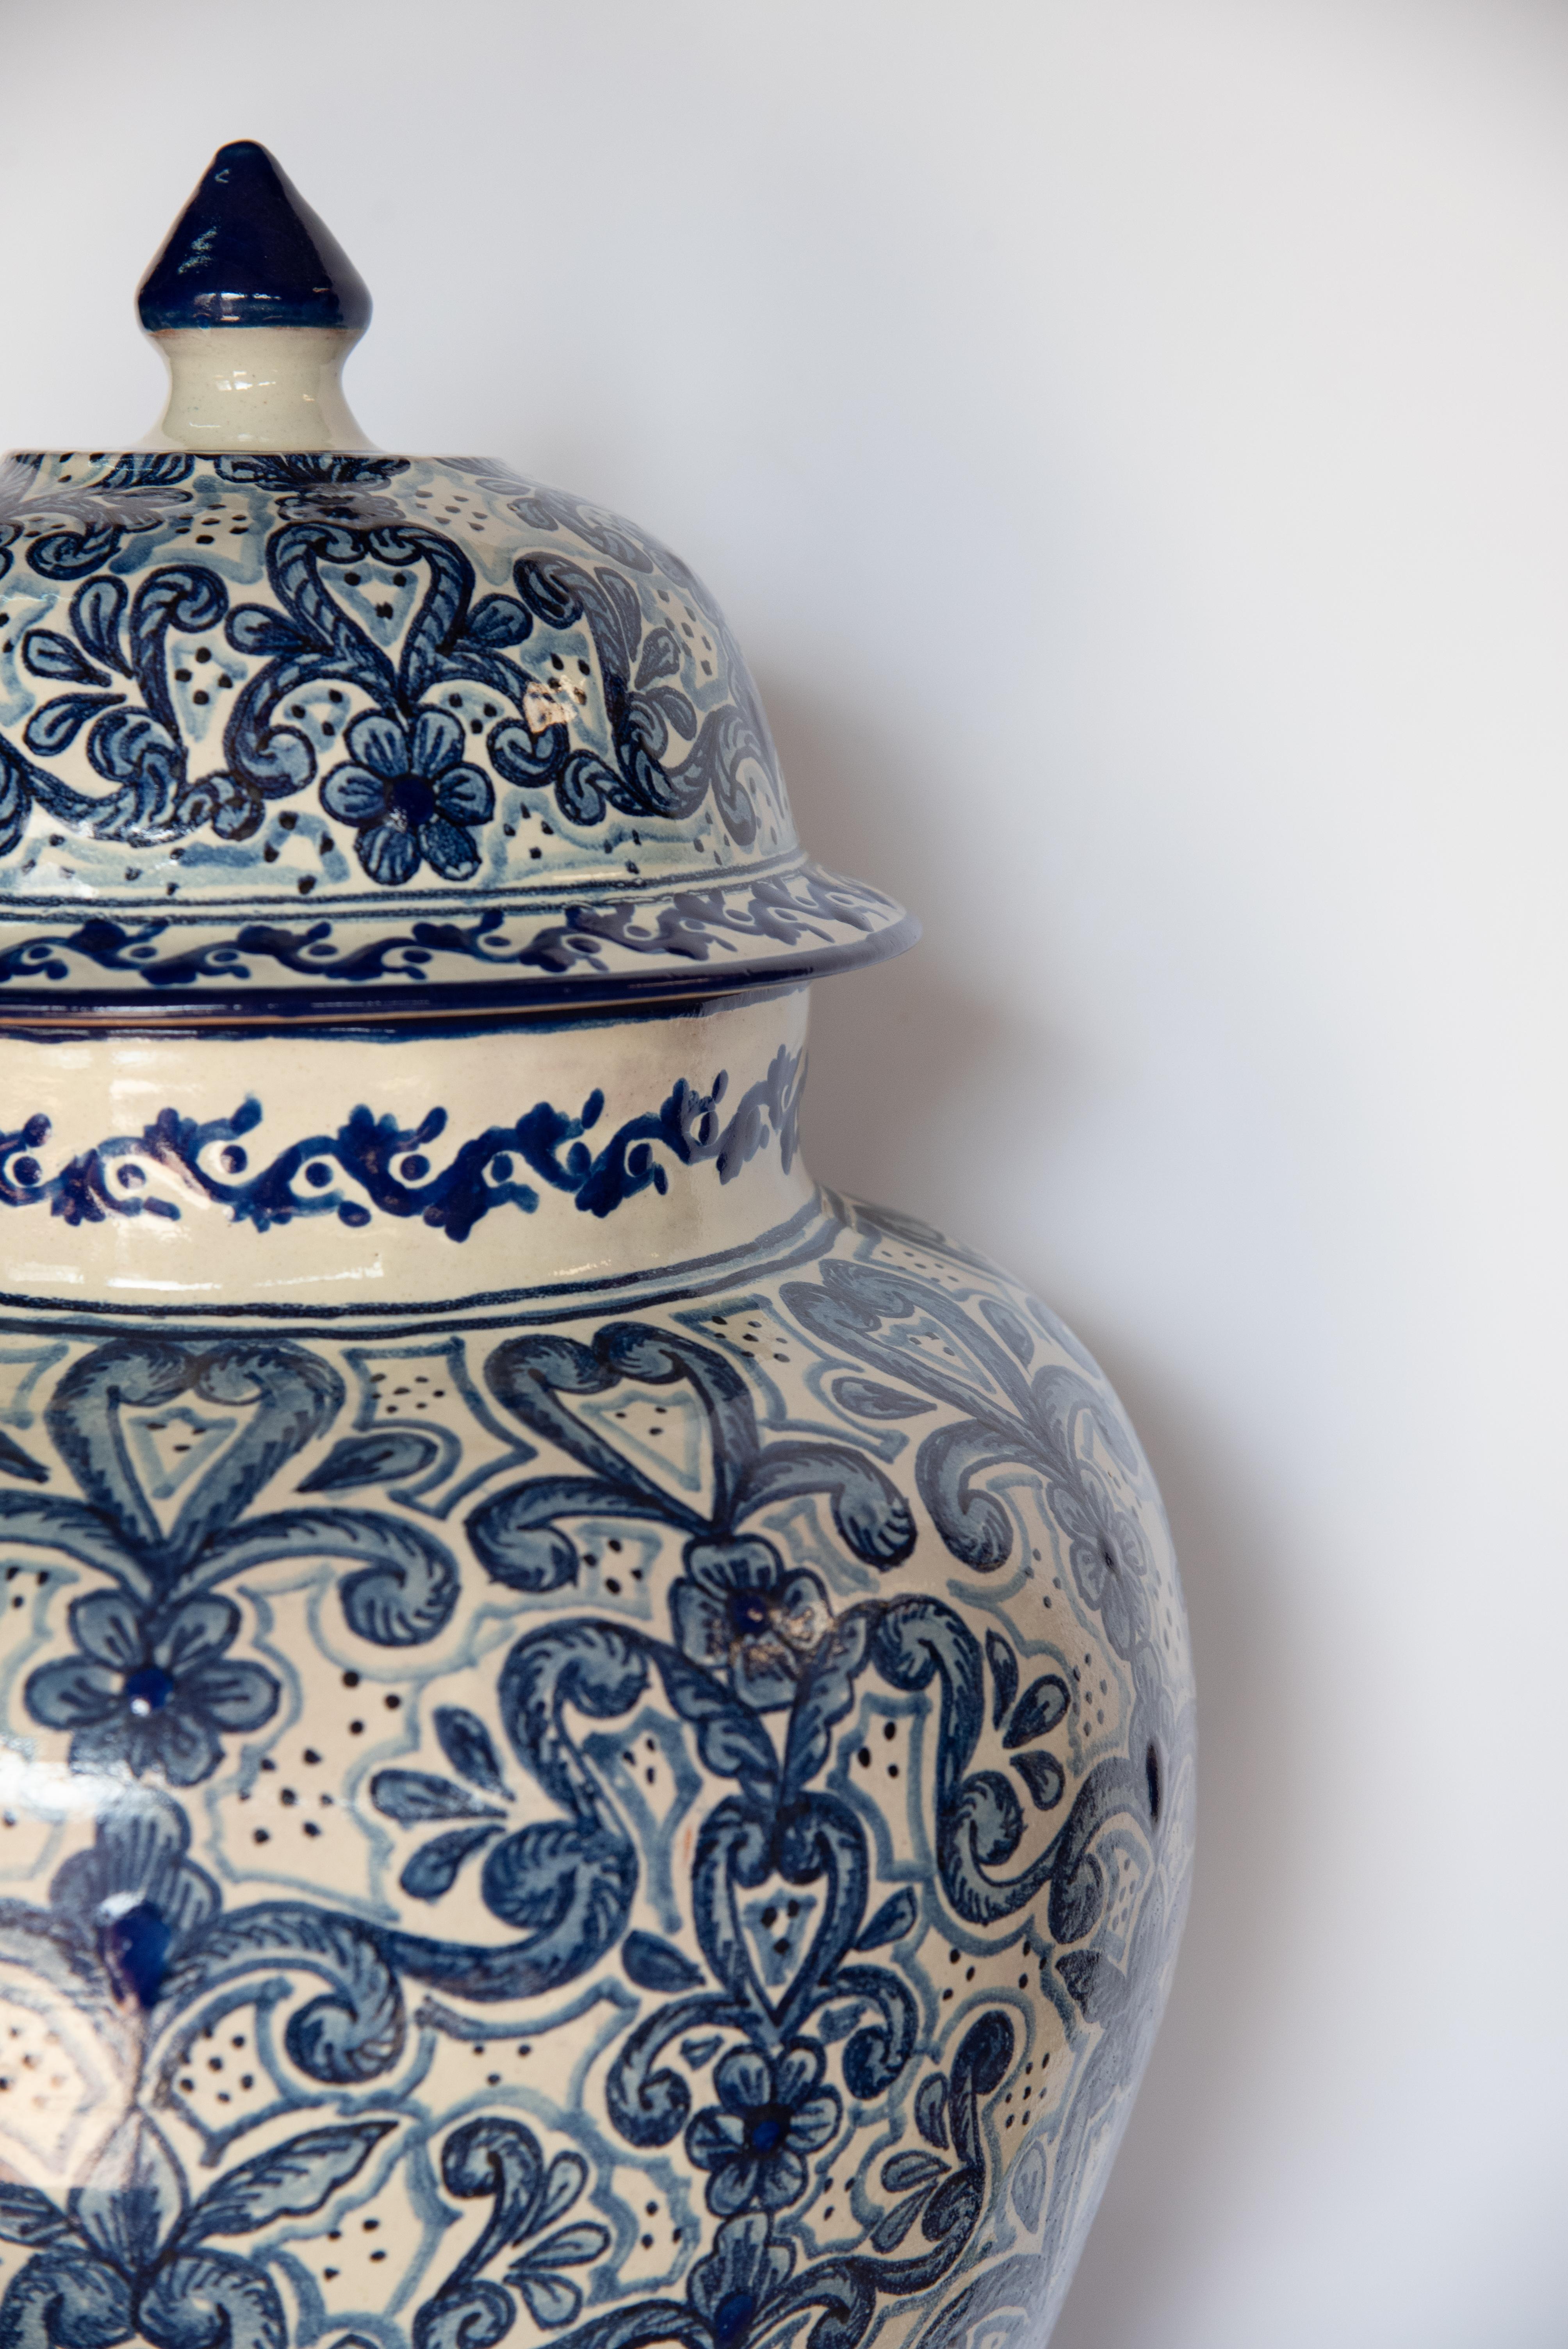 This one of a kind vessel is a collector's item by Talavera artist, Cesar Torres. The vase figure comes with a pointy lid just as a traditional Talavera vase, its texture and design are however a mixture of colonial and contemporary design. 

The